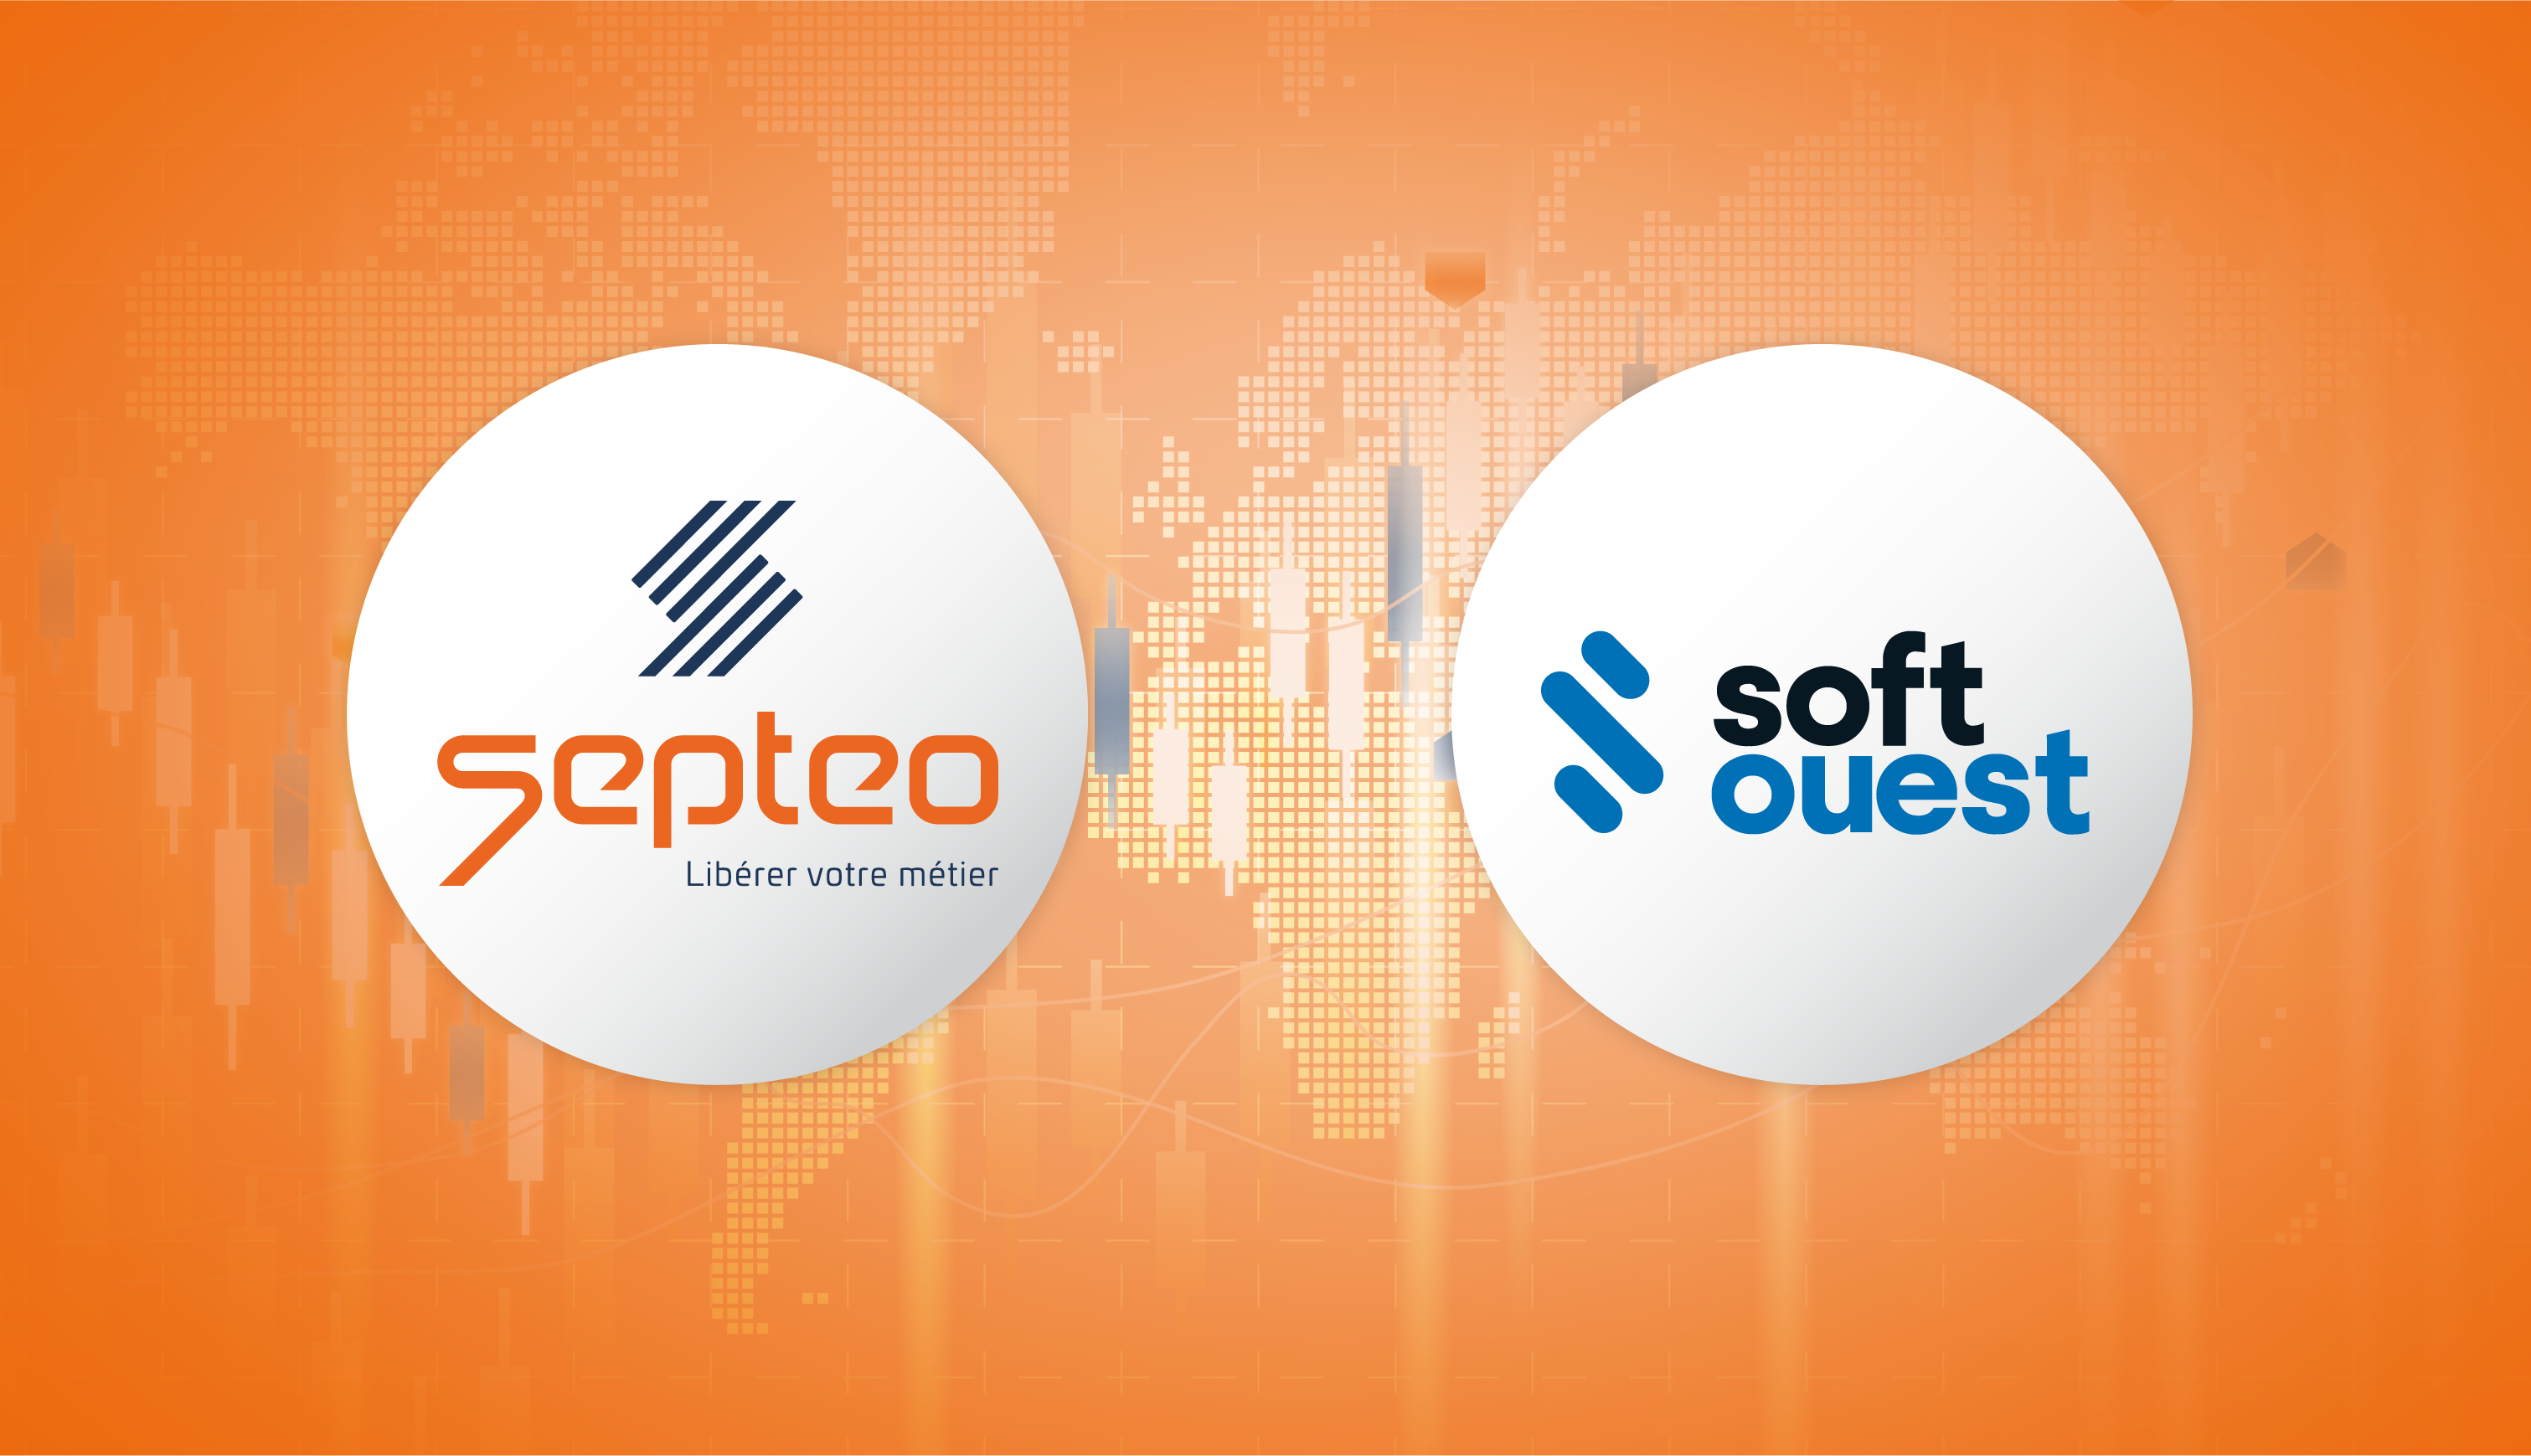 Septeo extends its expertise to enforcement agents with the acquisiton of SoftOuest